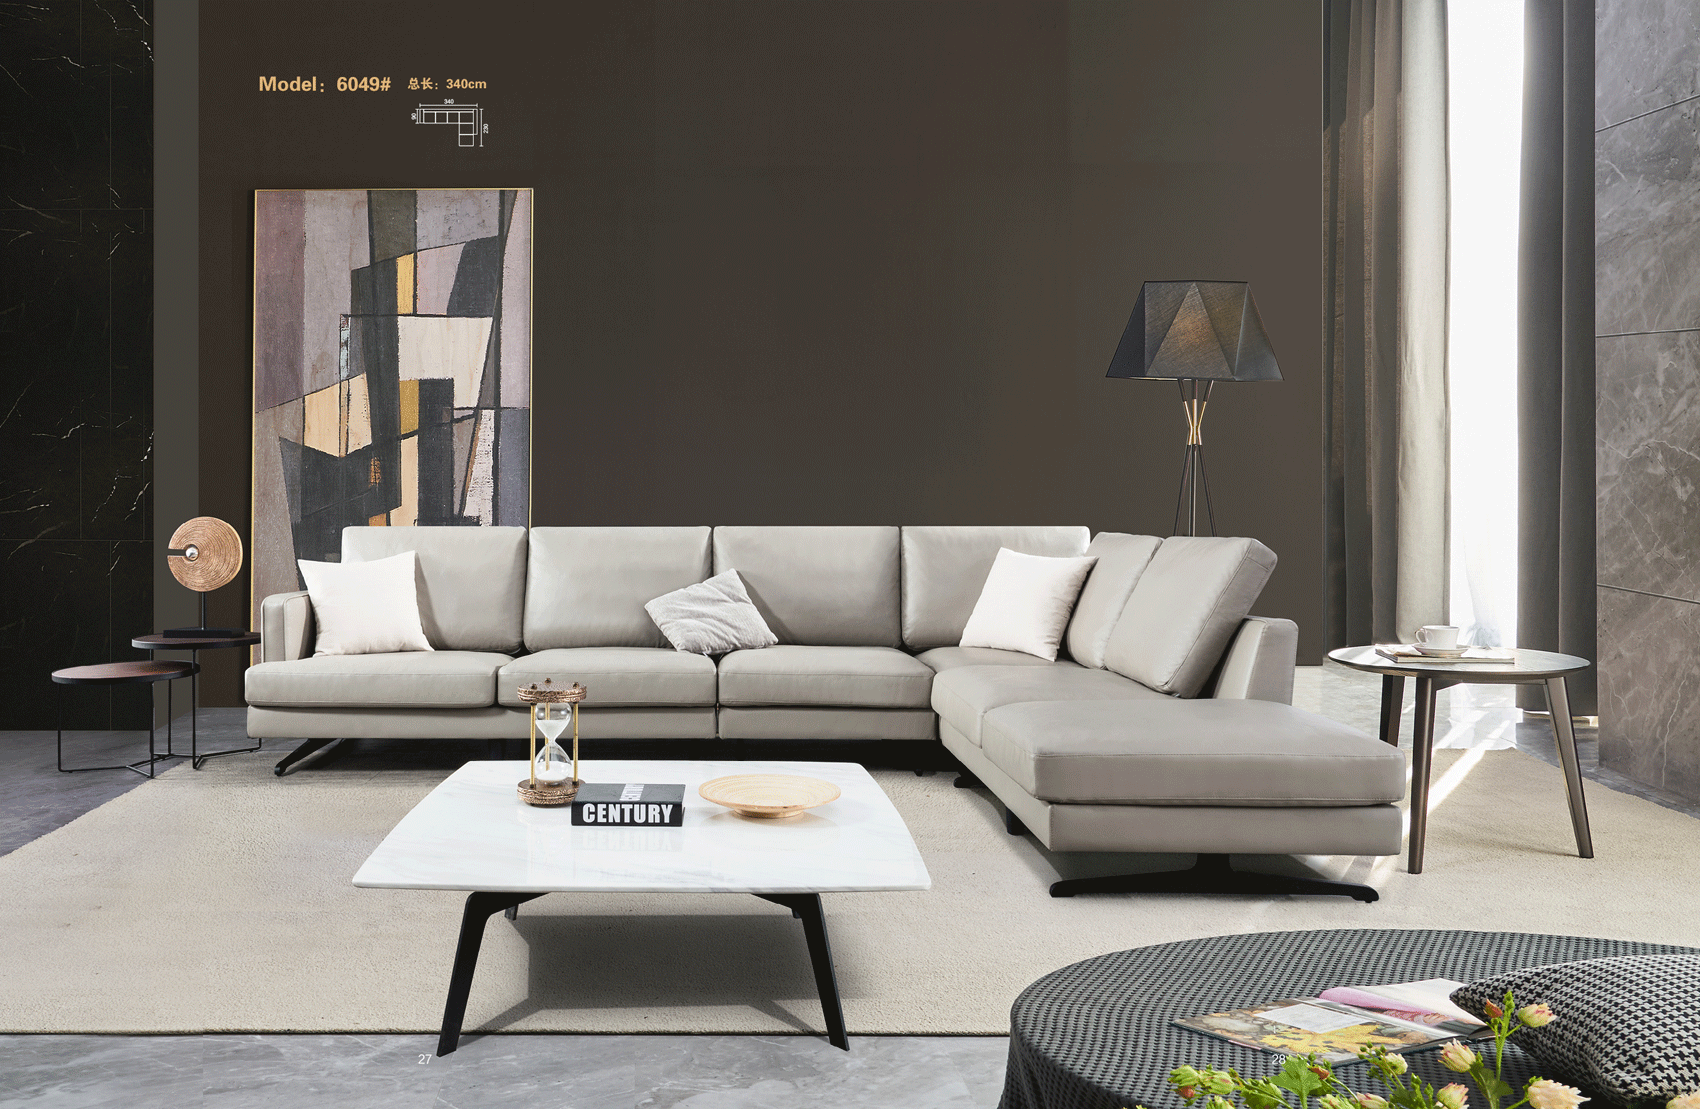 Brands Status Modern Collections, Italy 6049 Sectional